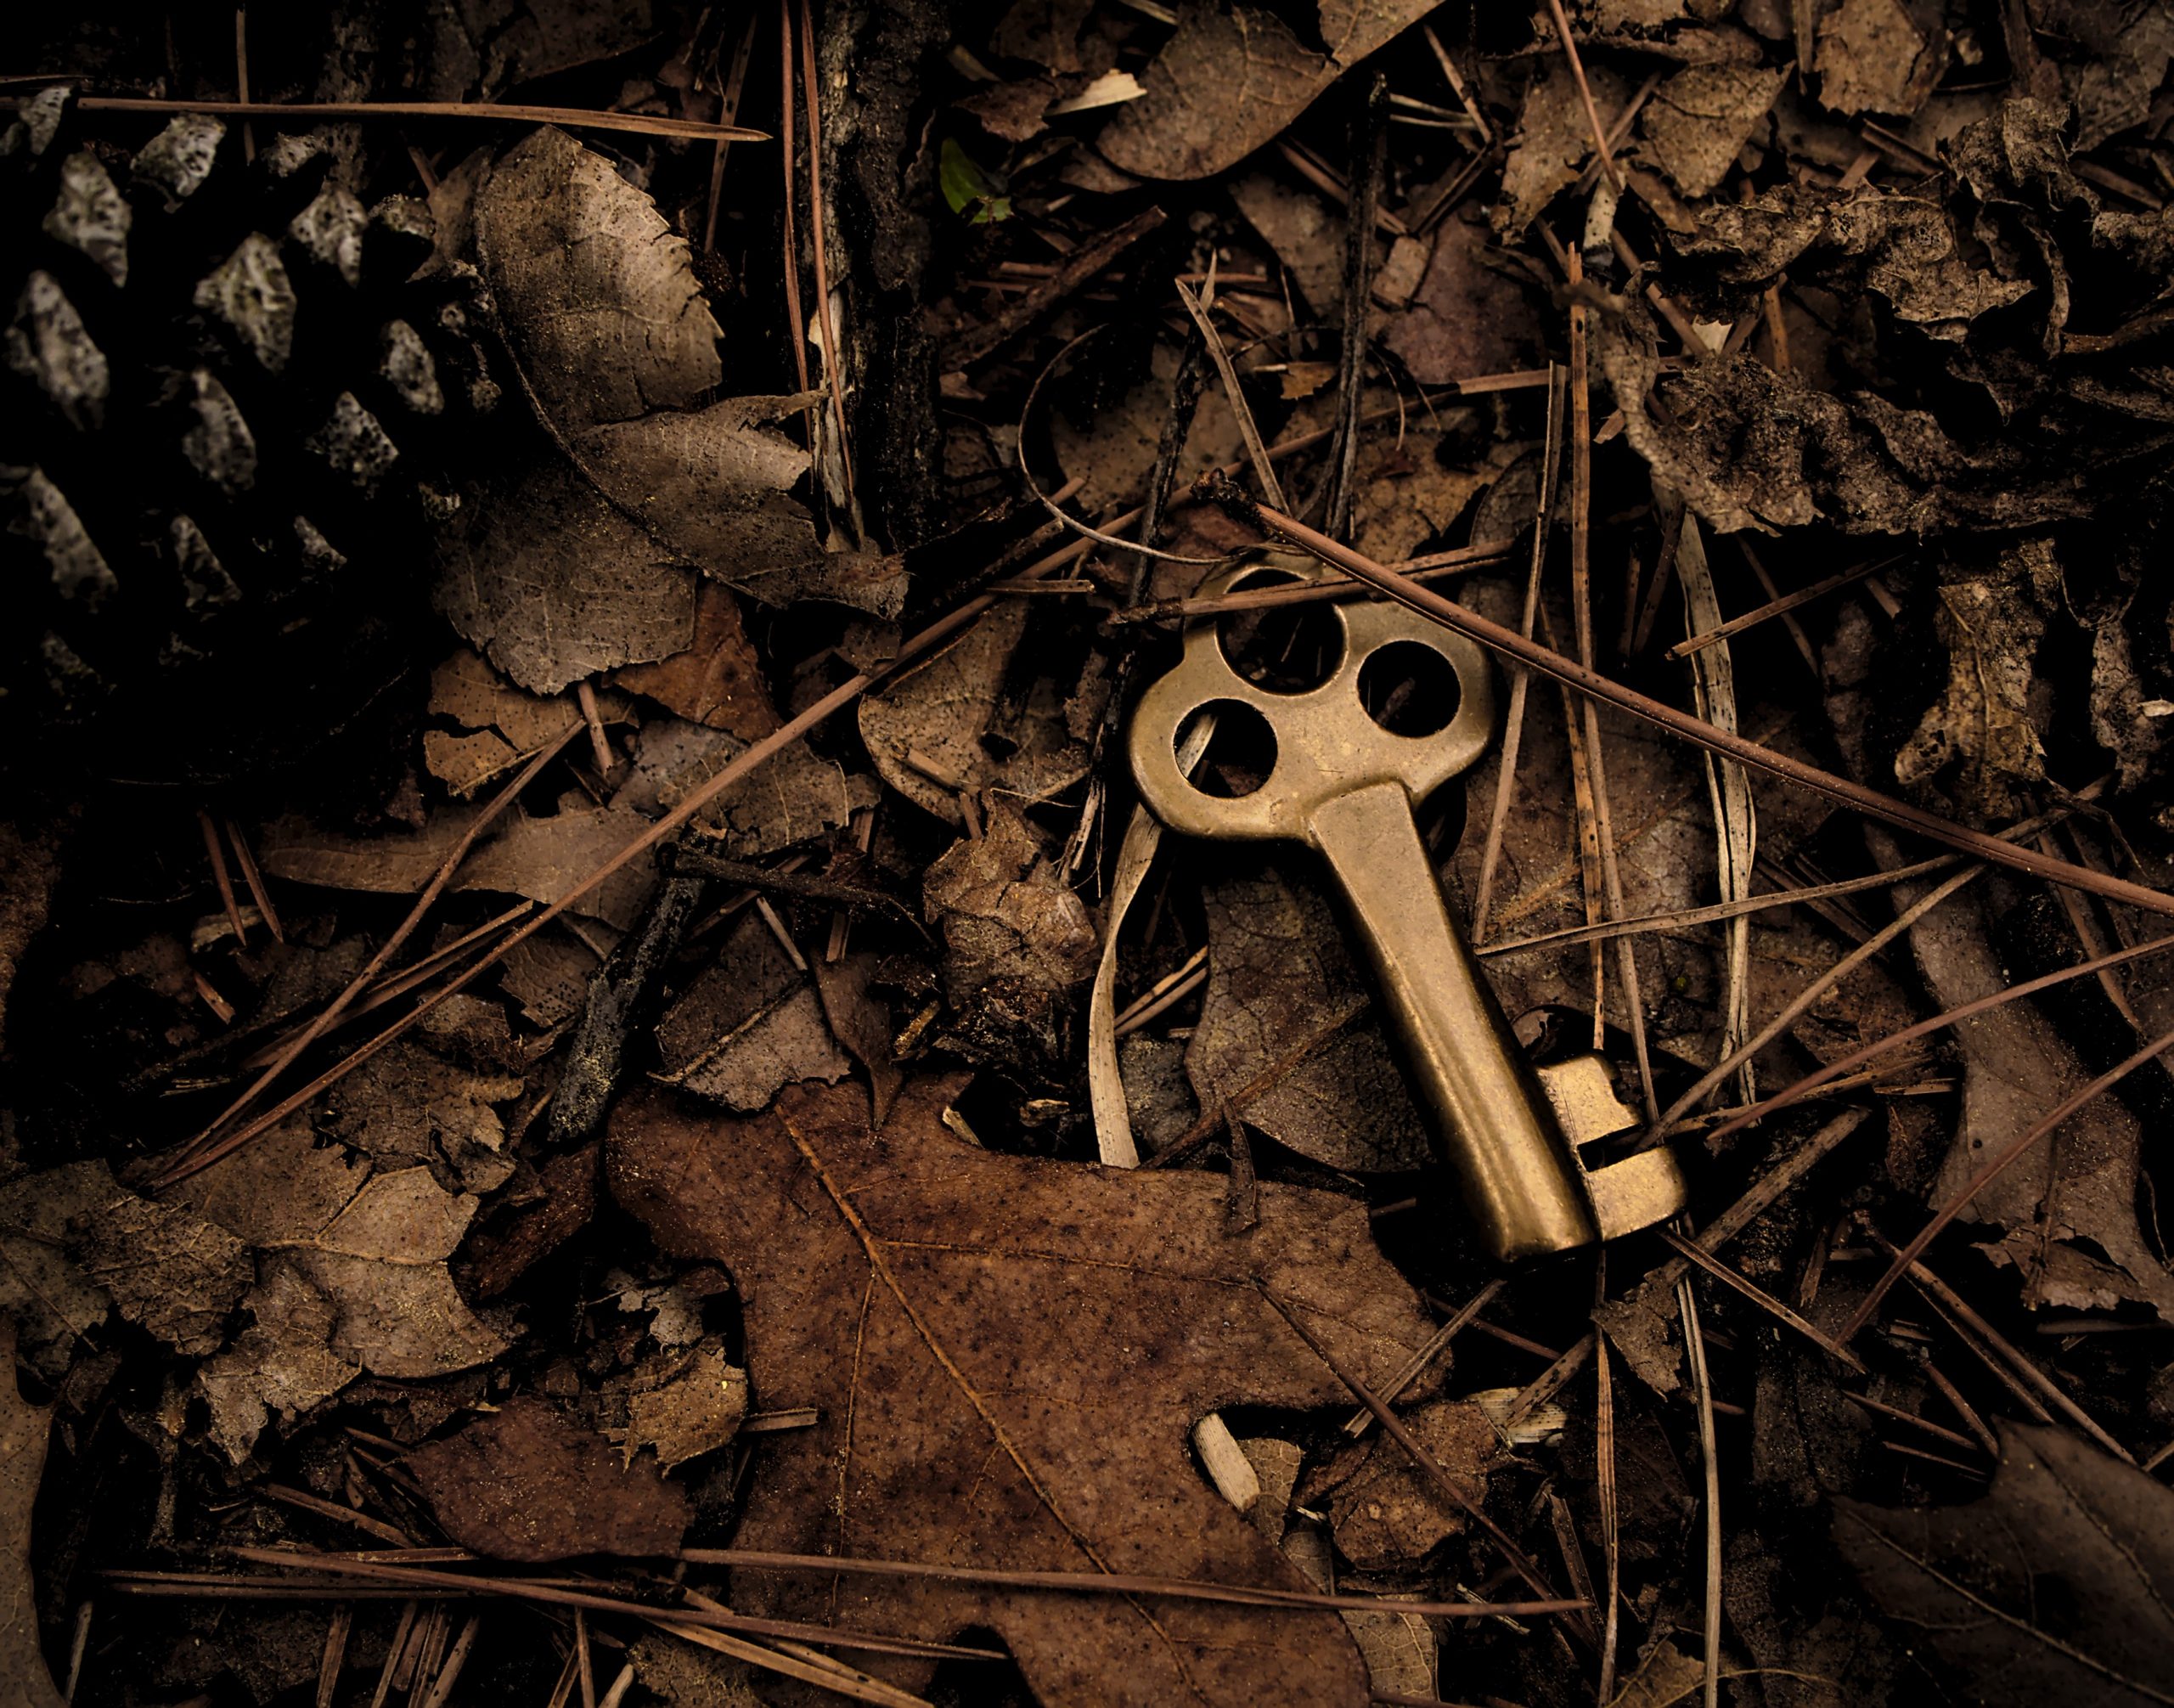 An old brass key dropped on the ground in the woods.